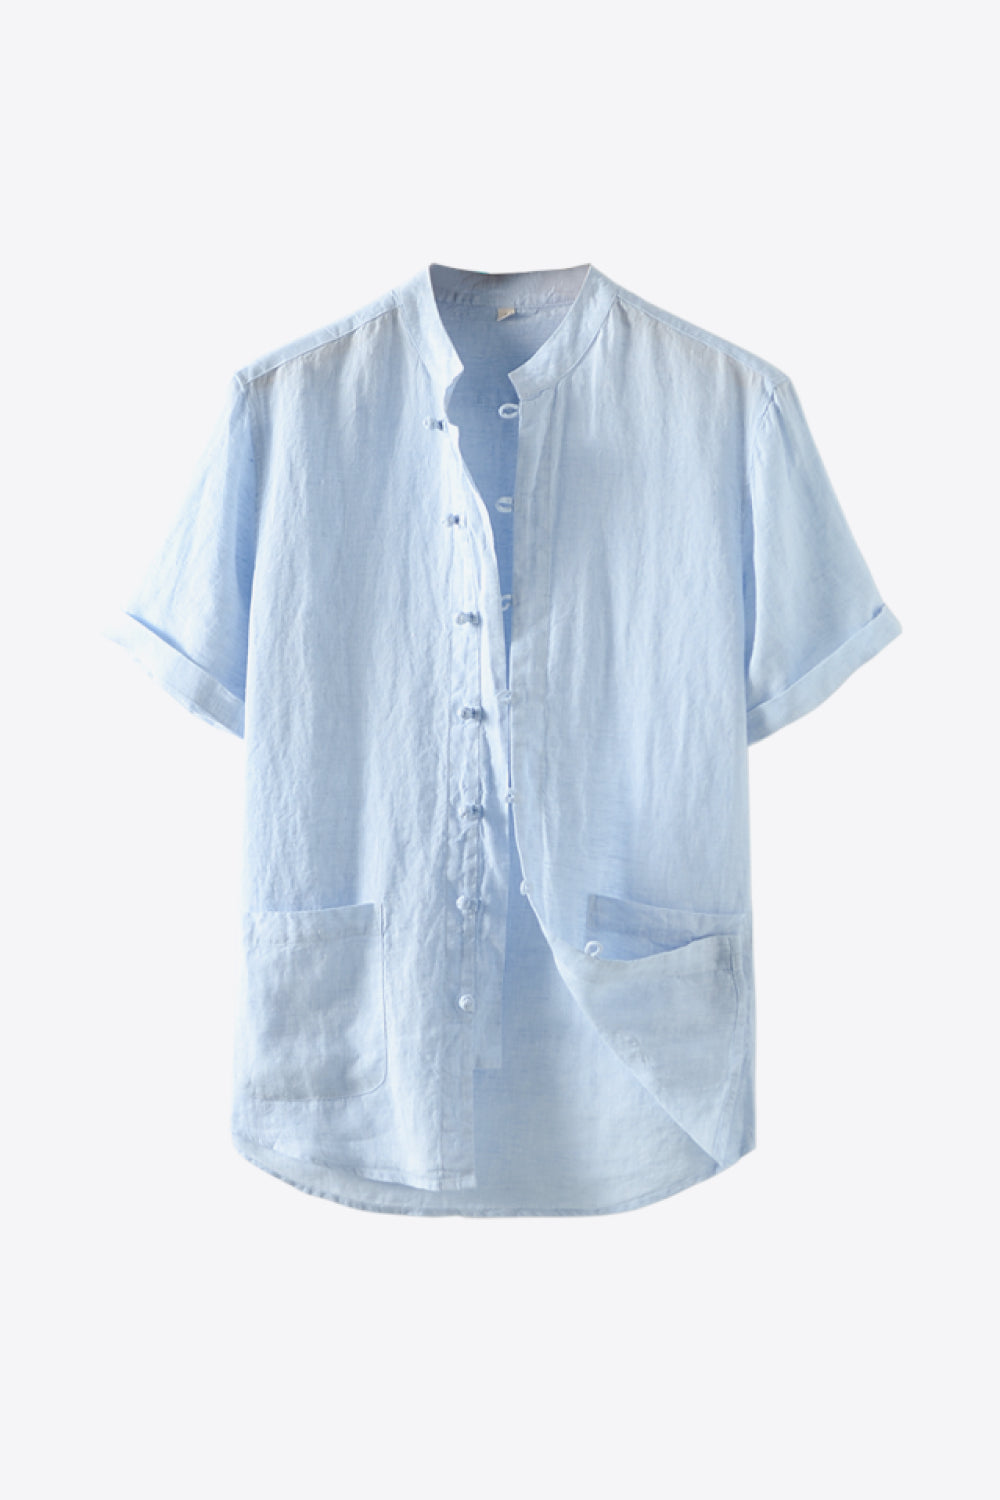 Buttoned Round Neck Short Sleeve Linen Shirt with Pockets_17